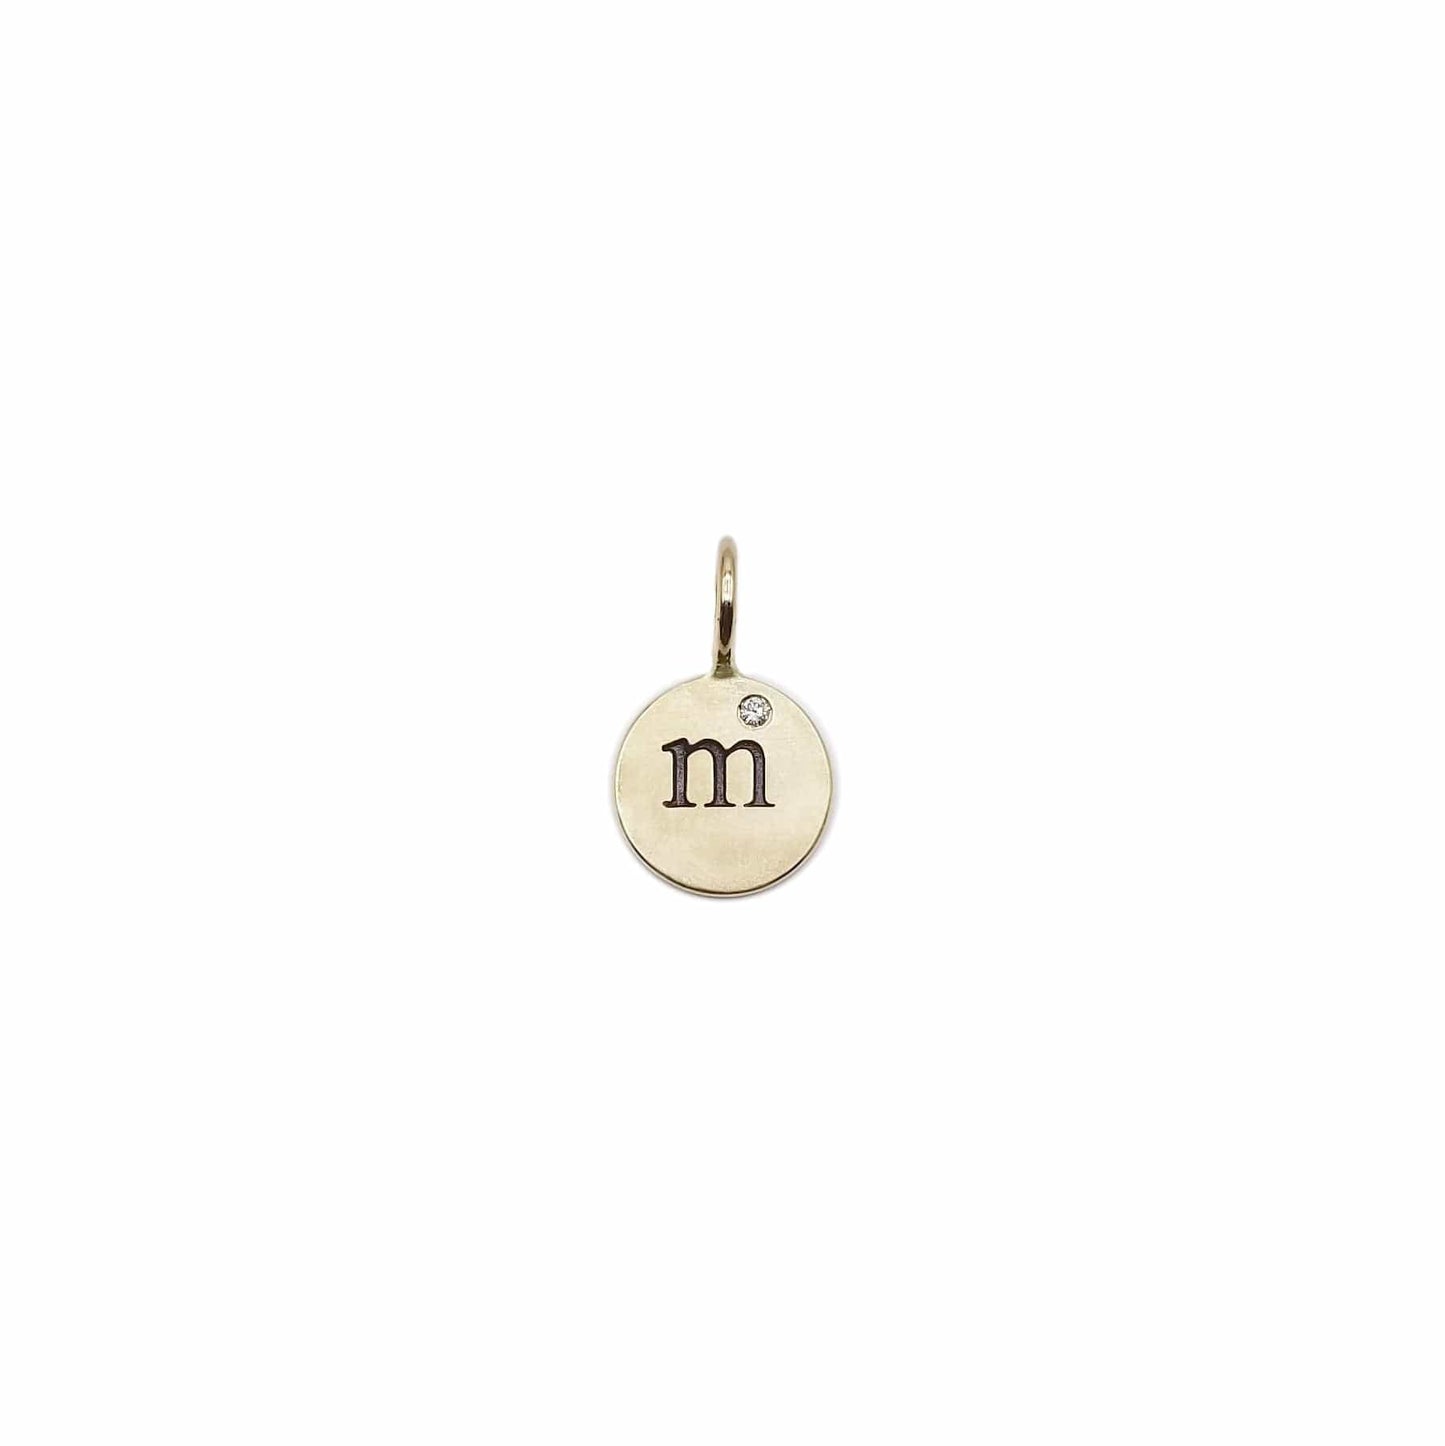 CHM 14k Yellow Gold Single Letter Charm with Diamond